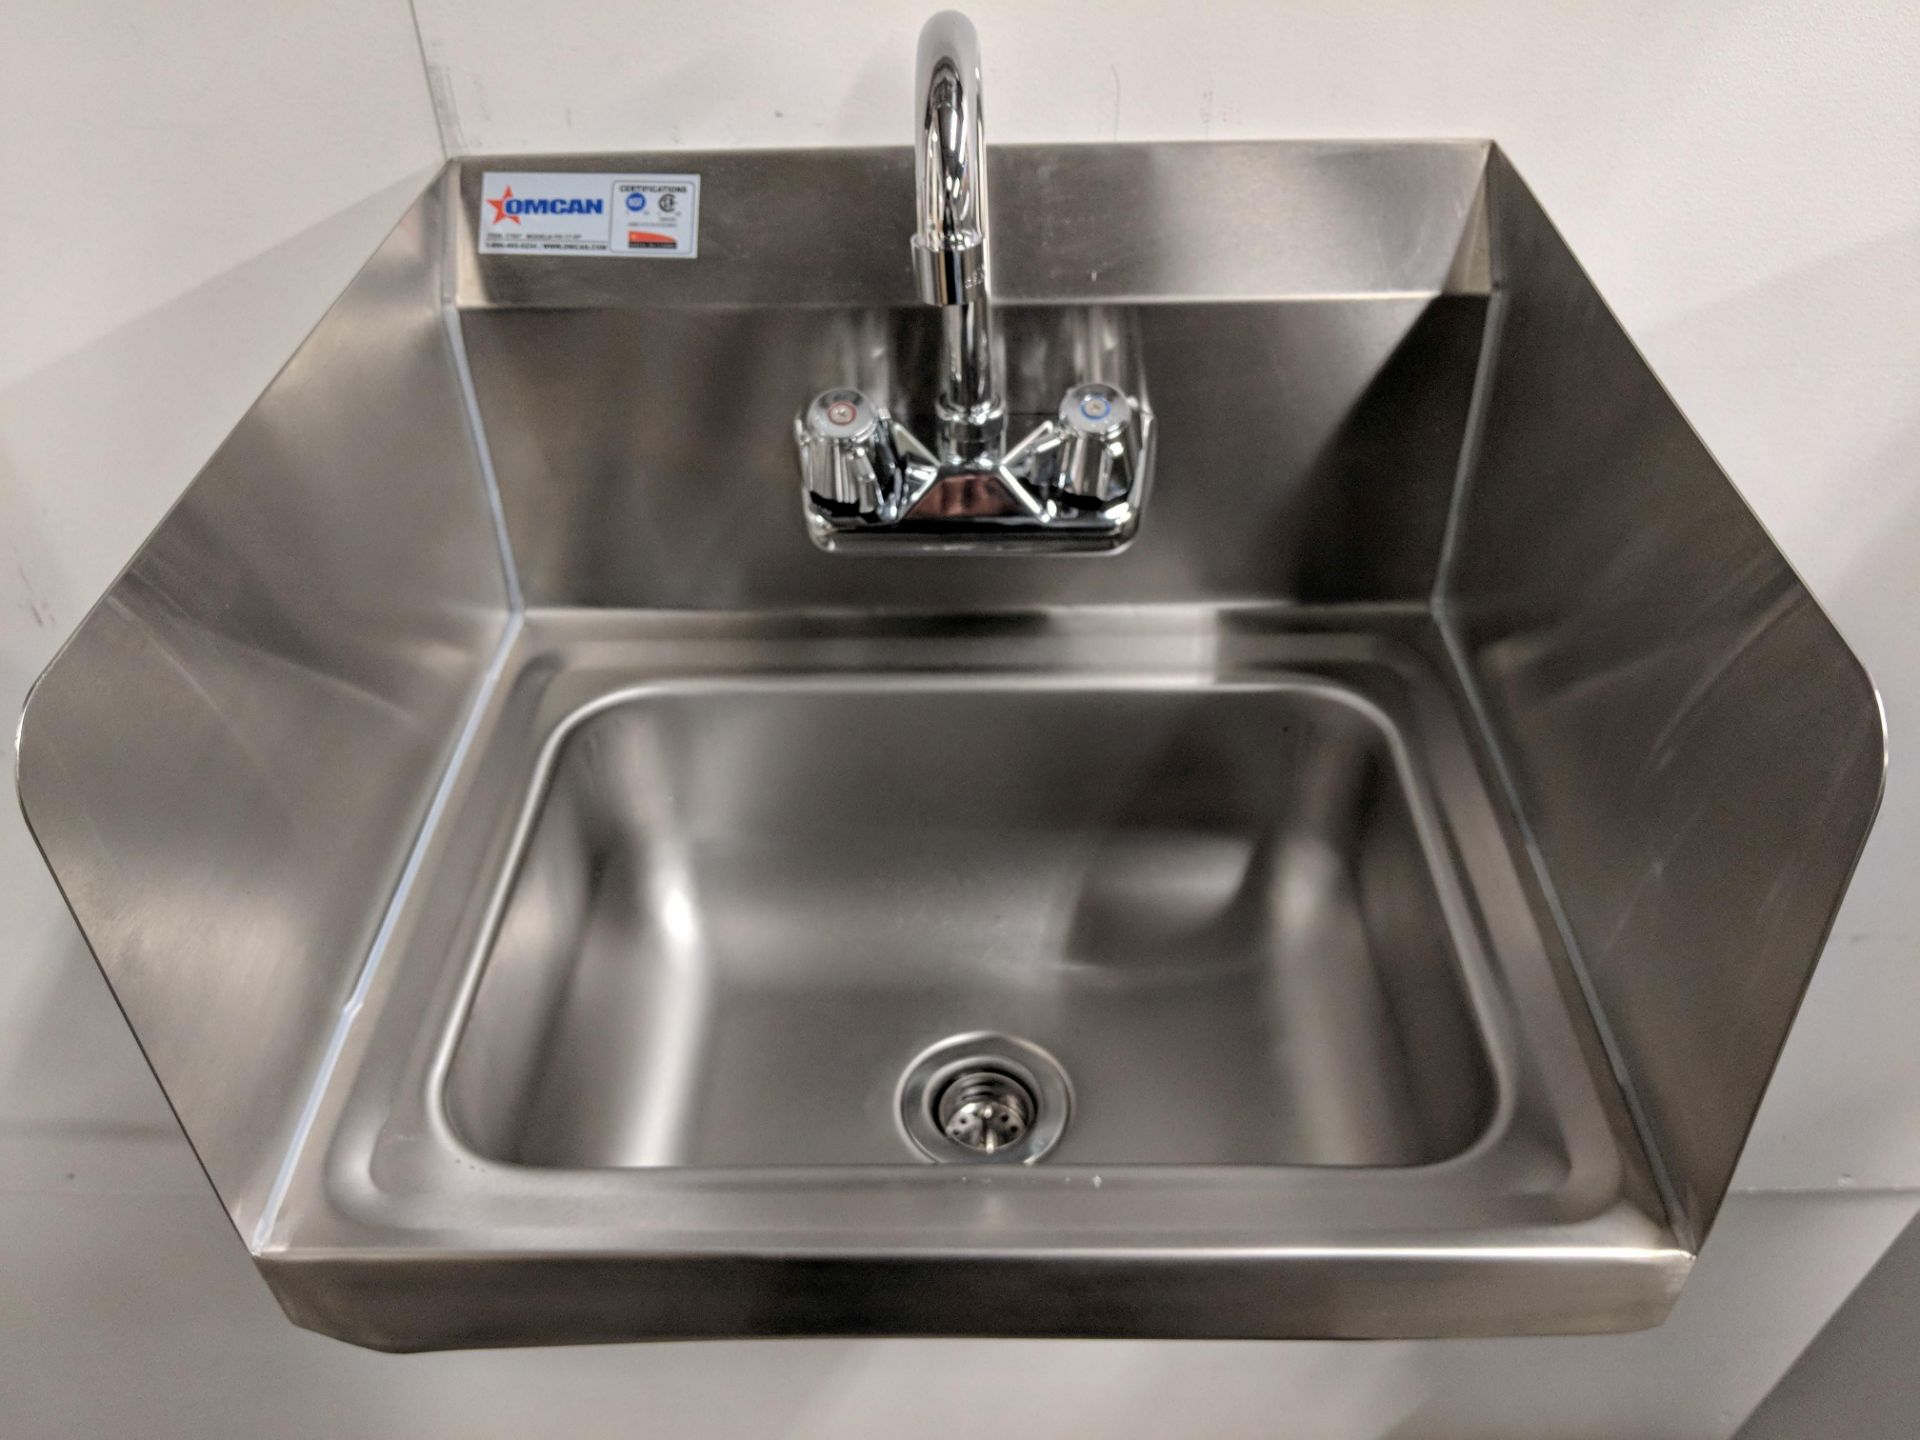 Hand Sink w/Faucet & Side Splashes, Overall Dims 15.25” x 17” x 13.5”, Bowl Dims 14” x 10” x 6” - Image 2 of 4